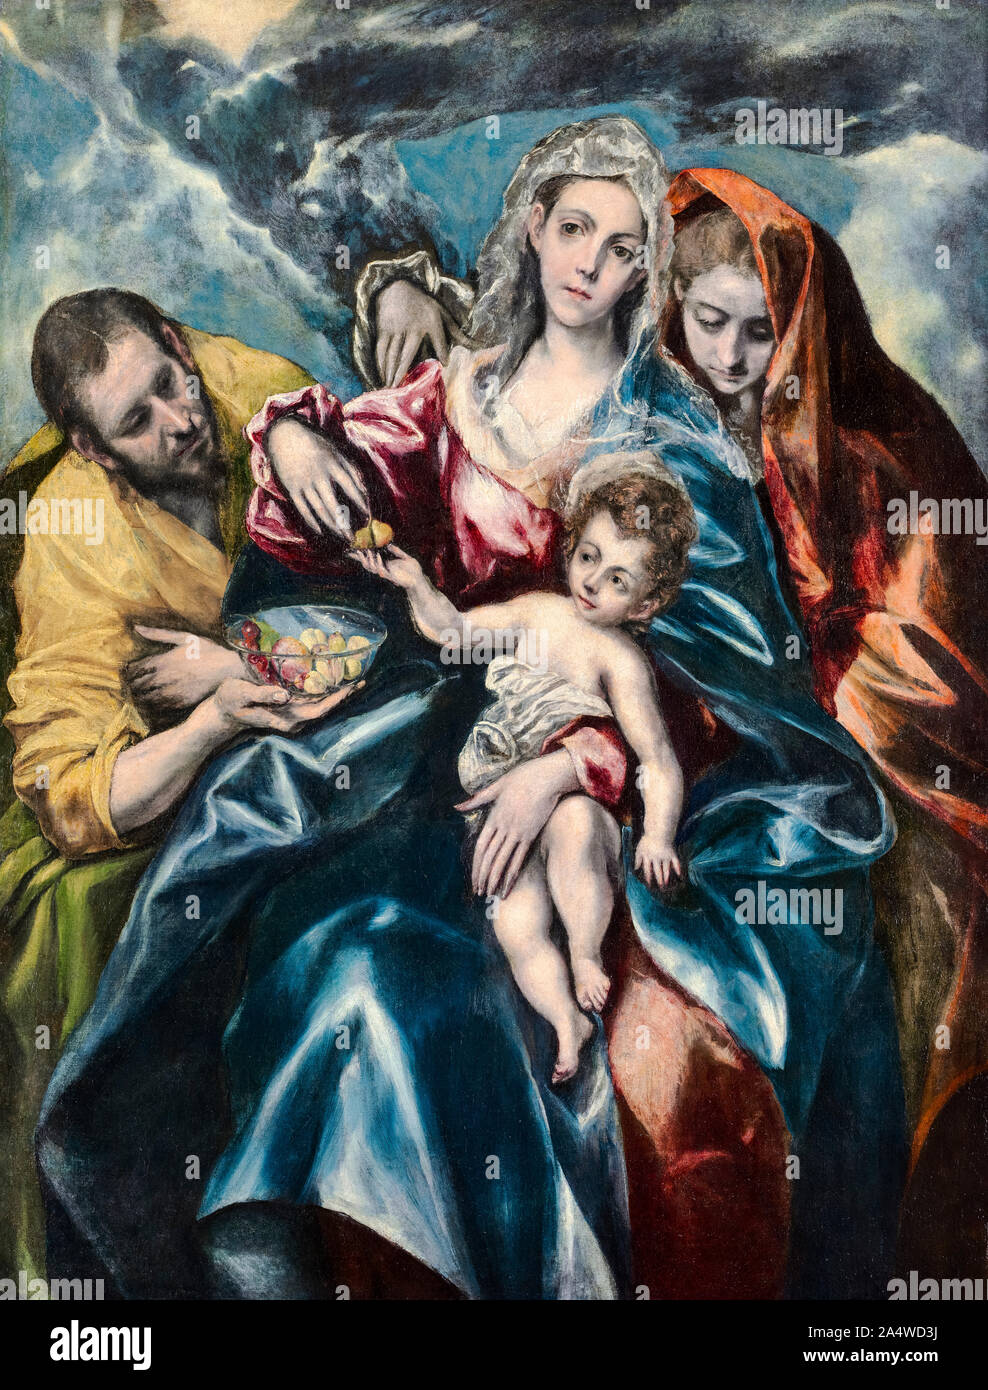 El Greco, painting, The Holy Family with Mary Magdalene, 1590-1595 Stock Photo